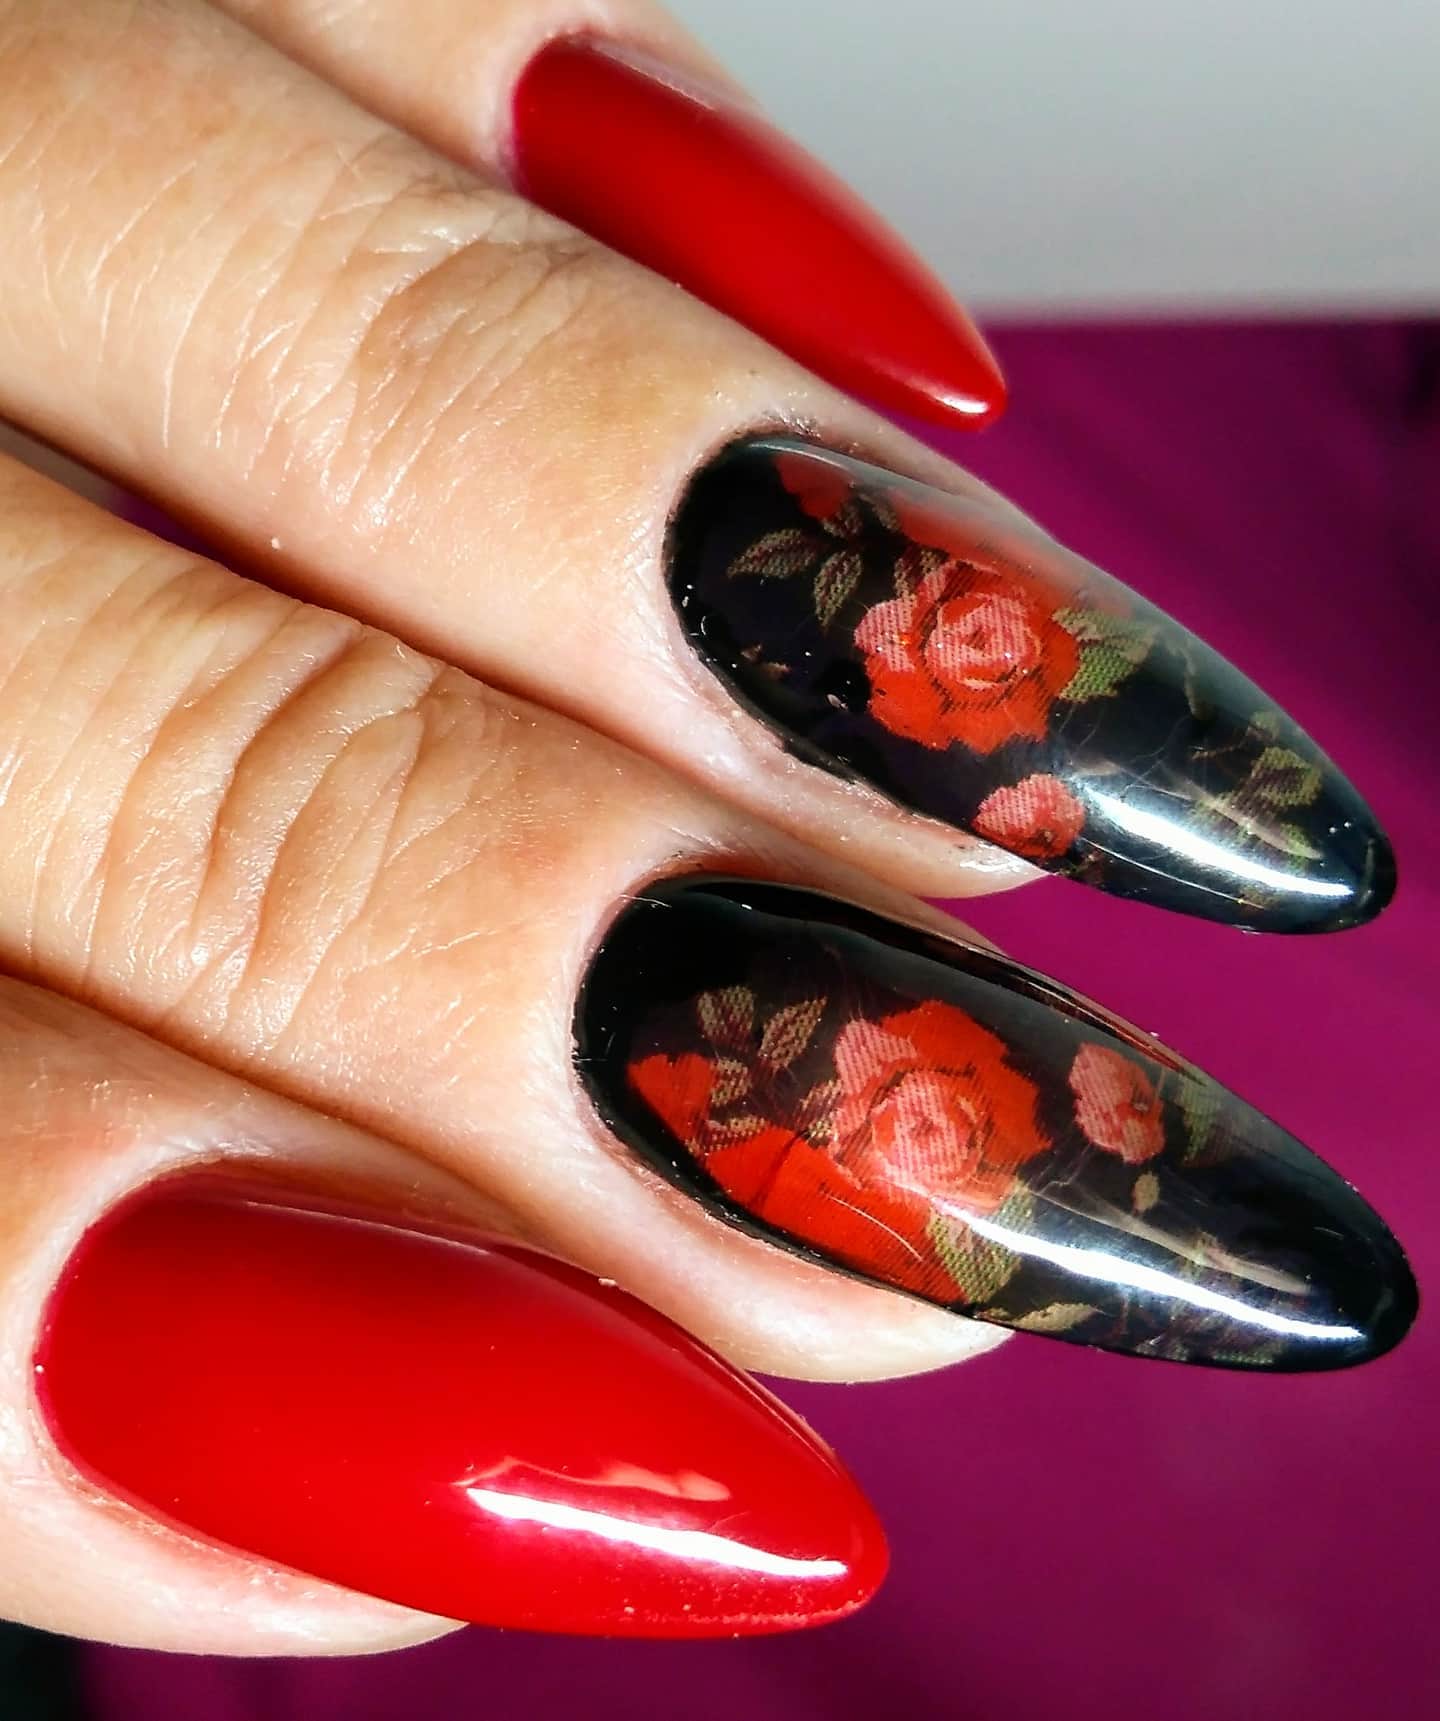 A chic rose nail design can be all you need to get to look amazing with your long almond nails. This design has a vintage vibe due to its look and this is what makes it unique. The black base behind makes the roses stand out.